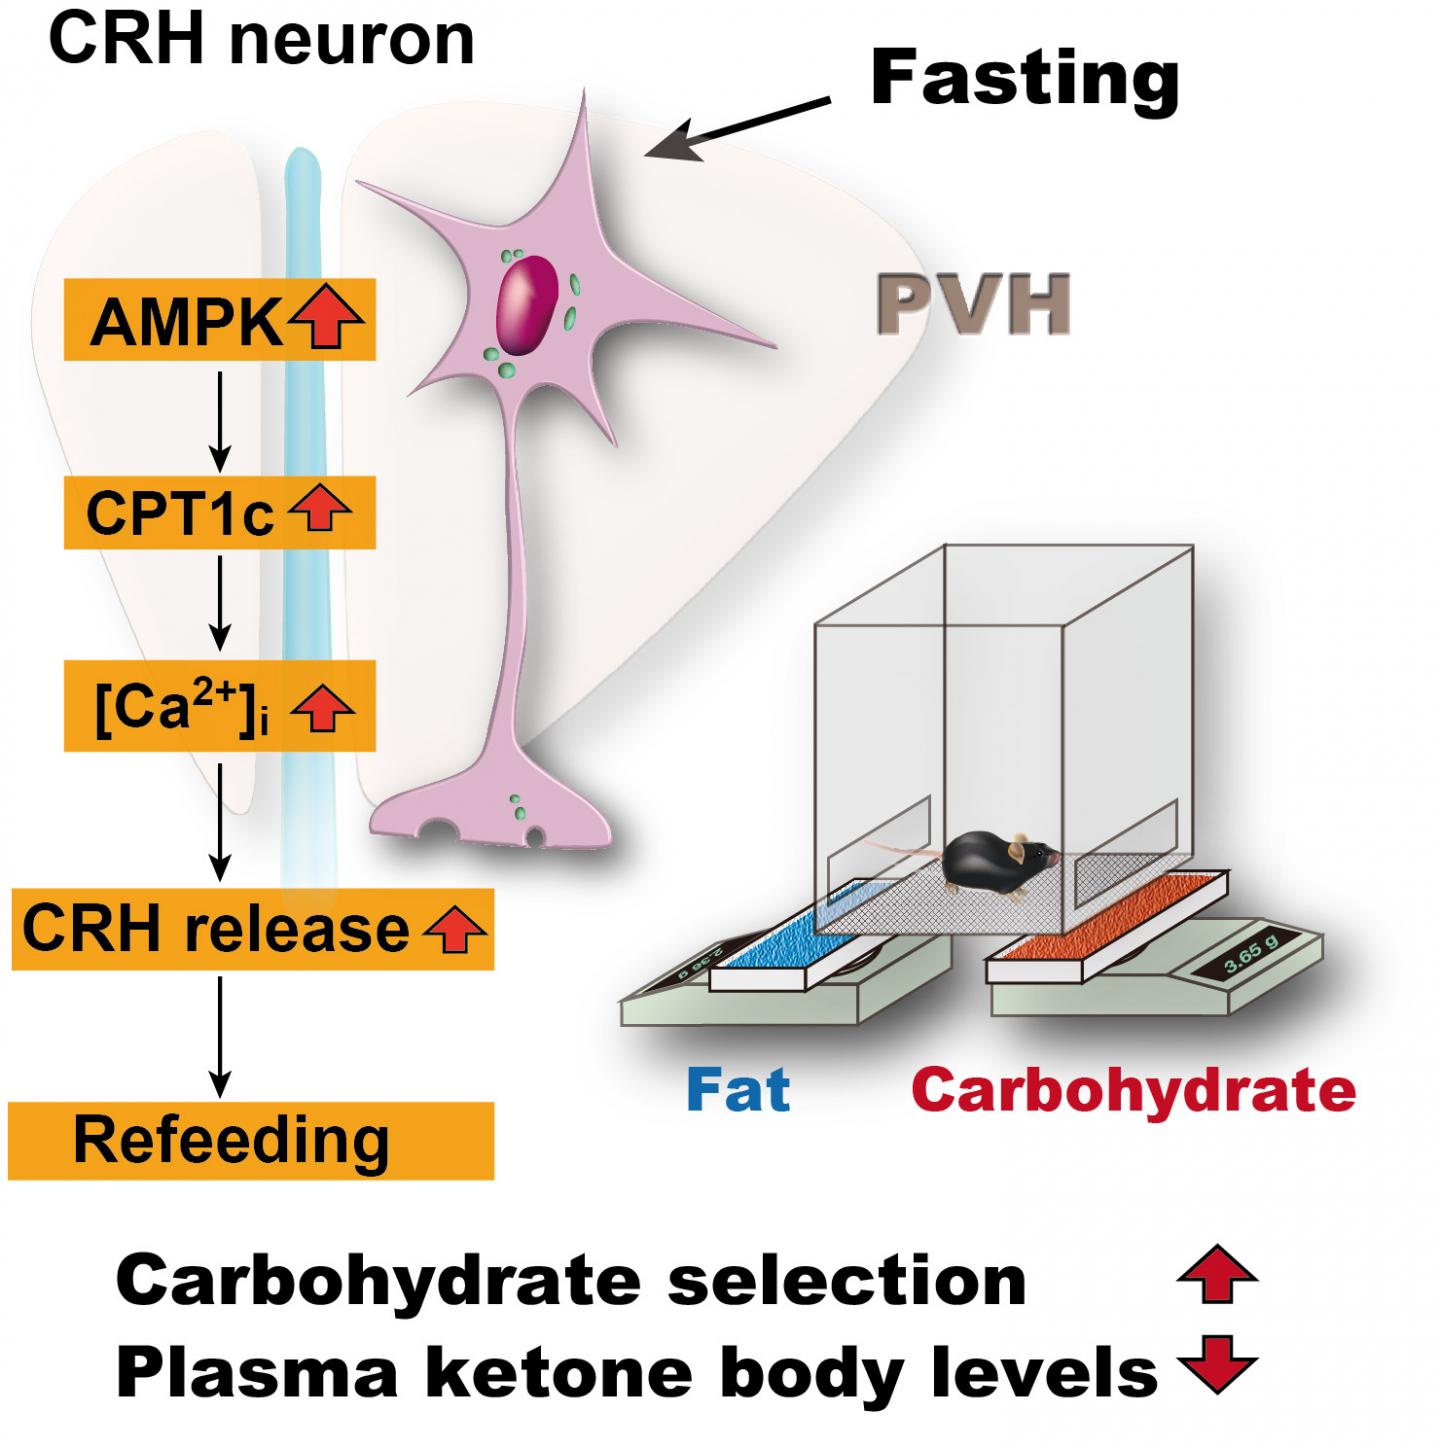 A Specific Group of Neurons is Sufficient and Necessary to Induce Dietary Preference for Carbohydrate over Fat